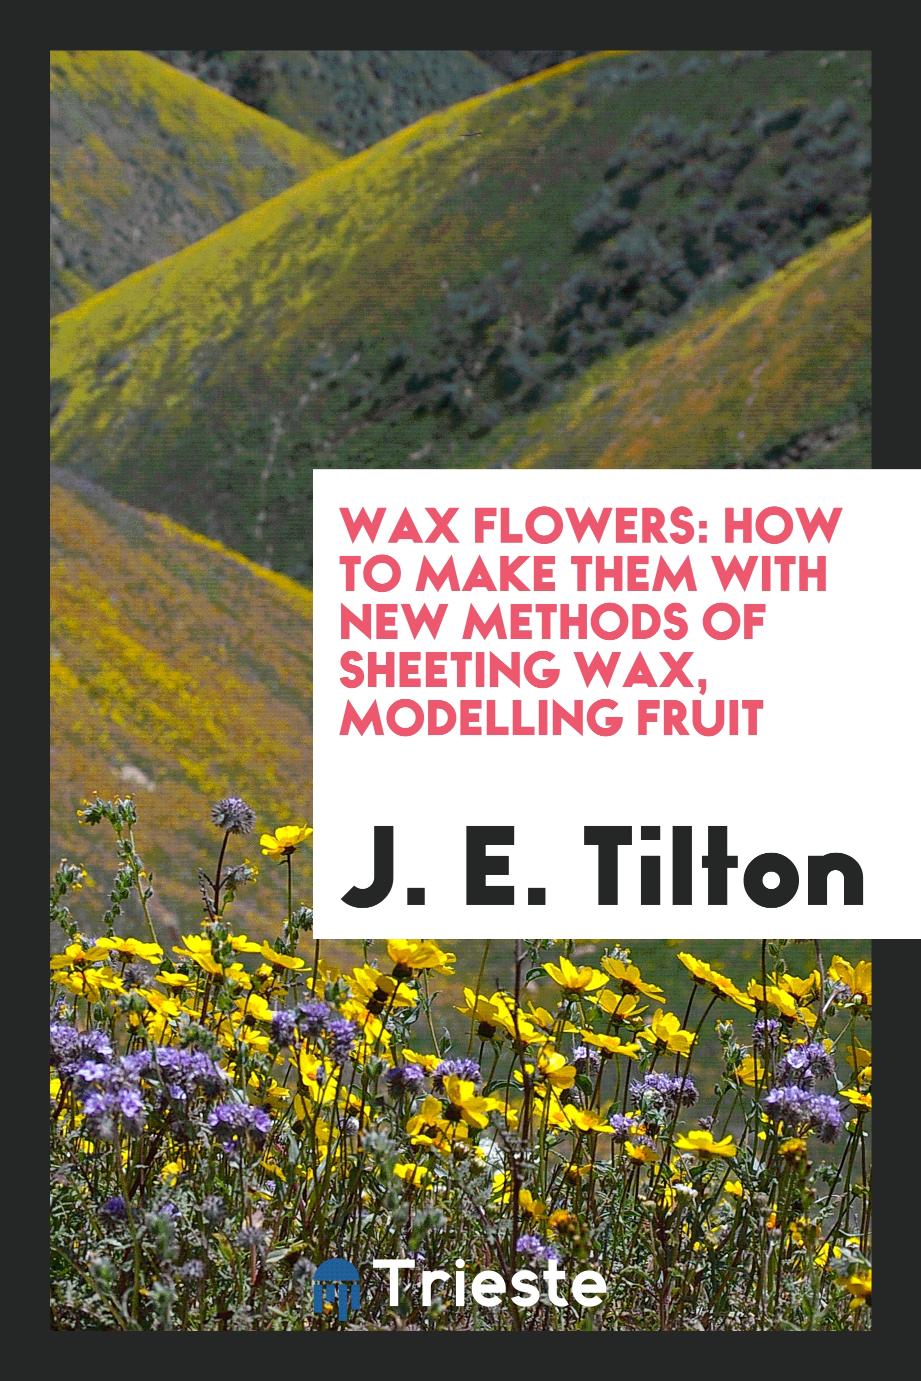 Wax Flowers: How to Make Them with New Methods of Sheeting Wax, Modelling Fruit